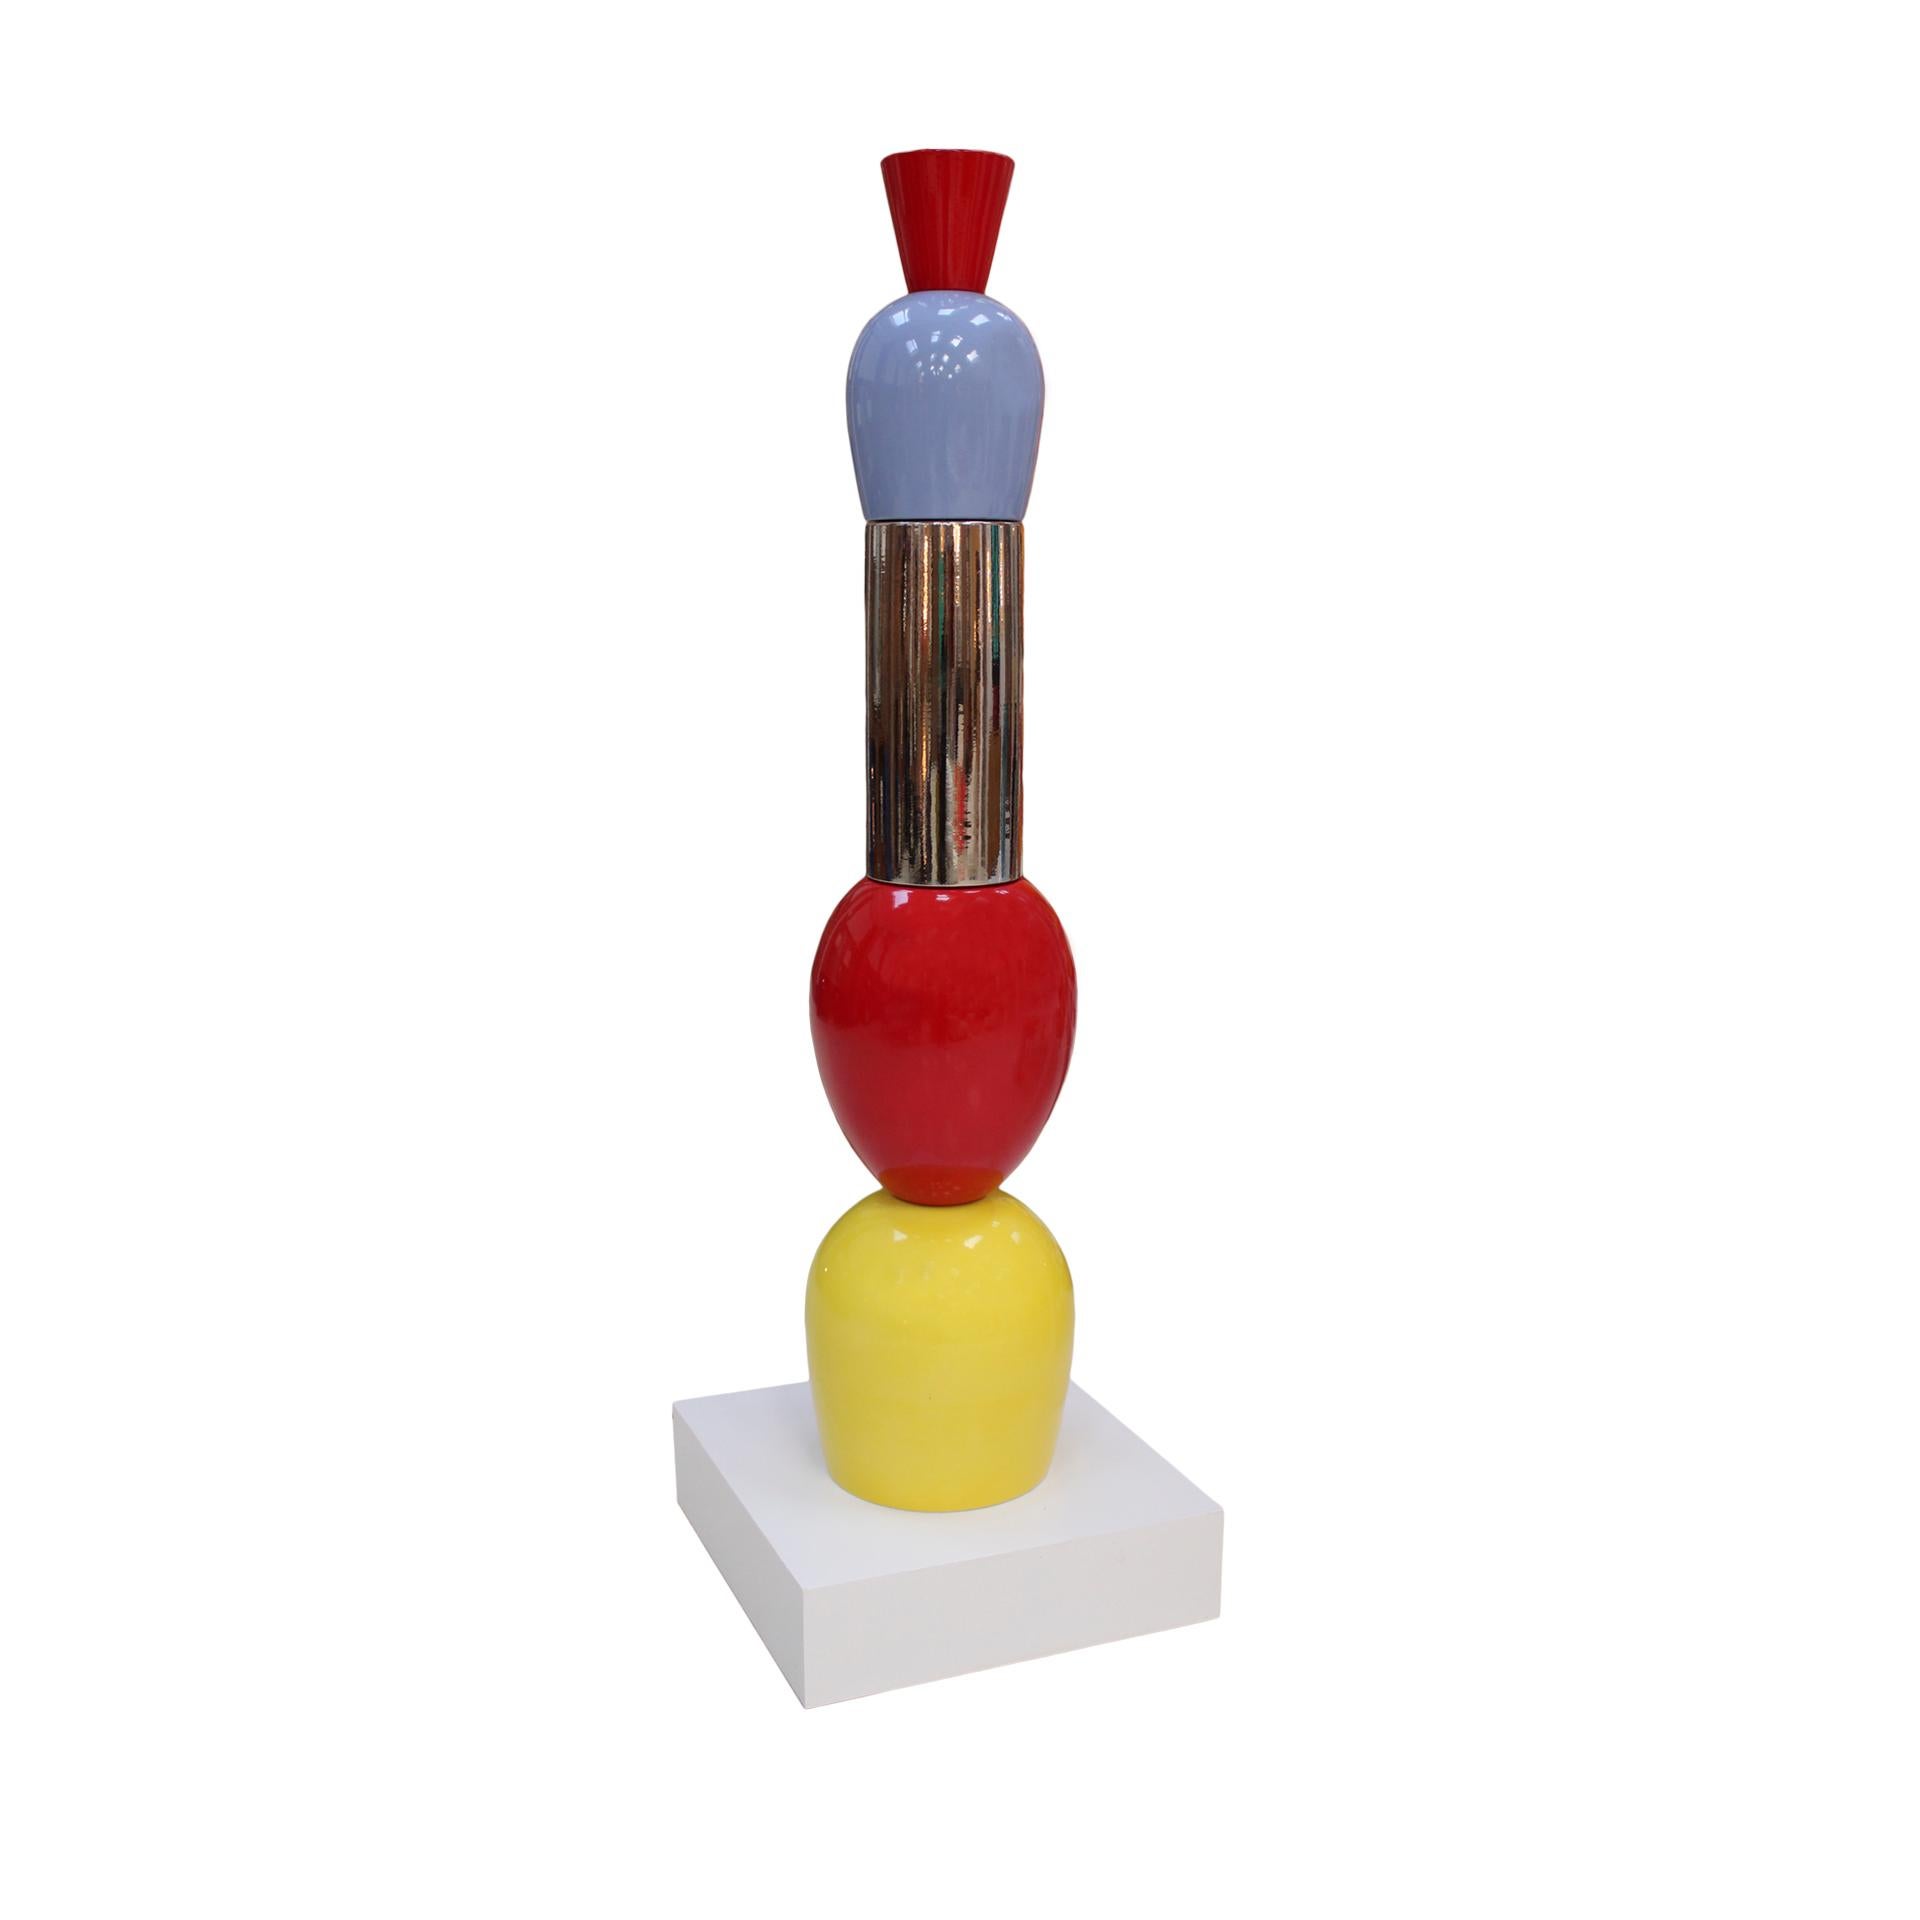 Ceramic totem designed by Alessandro Mendini, Italy. Stamped A.MENDINI Superego edition made in Italy, signed inside the base.

(Lacquered wooden base included)

Our main target is customer satisfaction, so we include in the price for this item